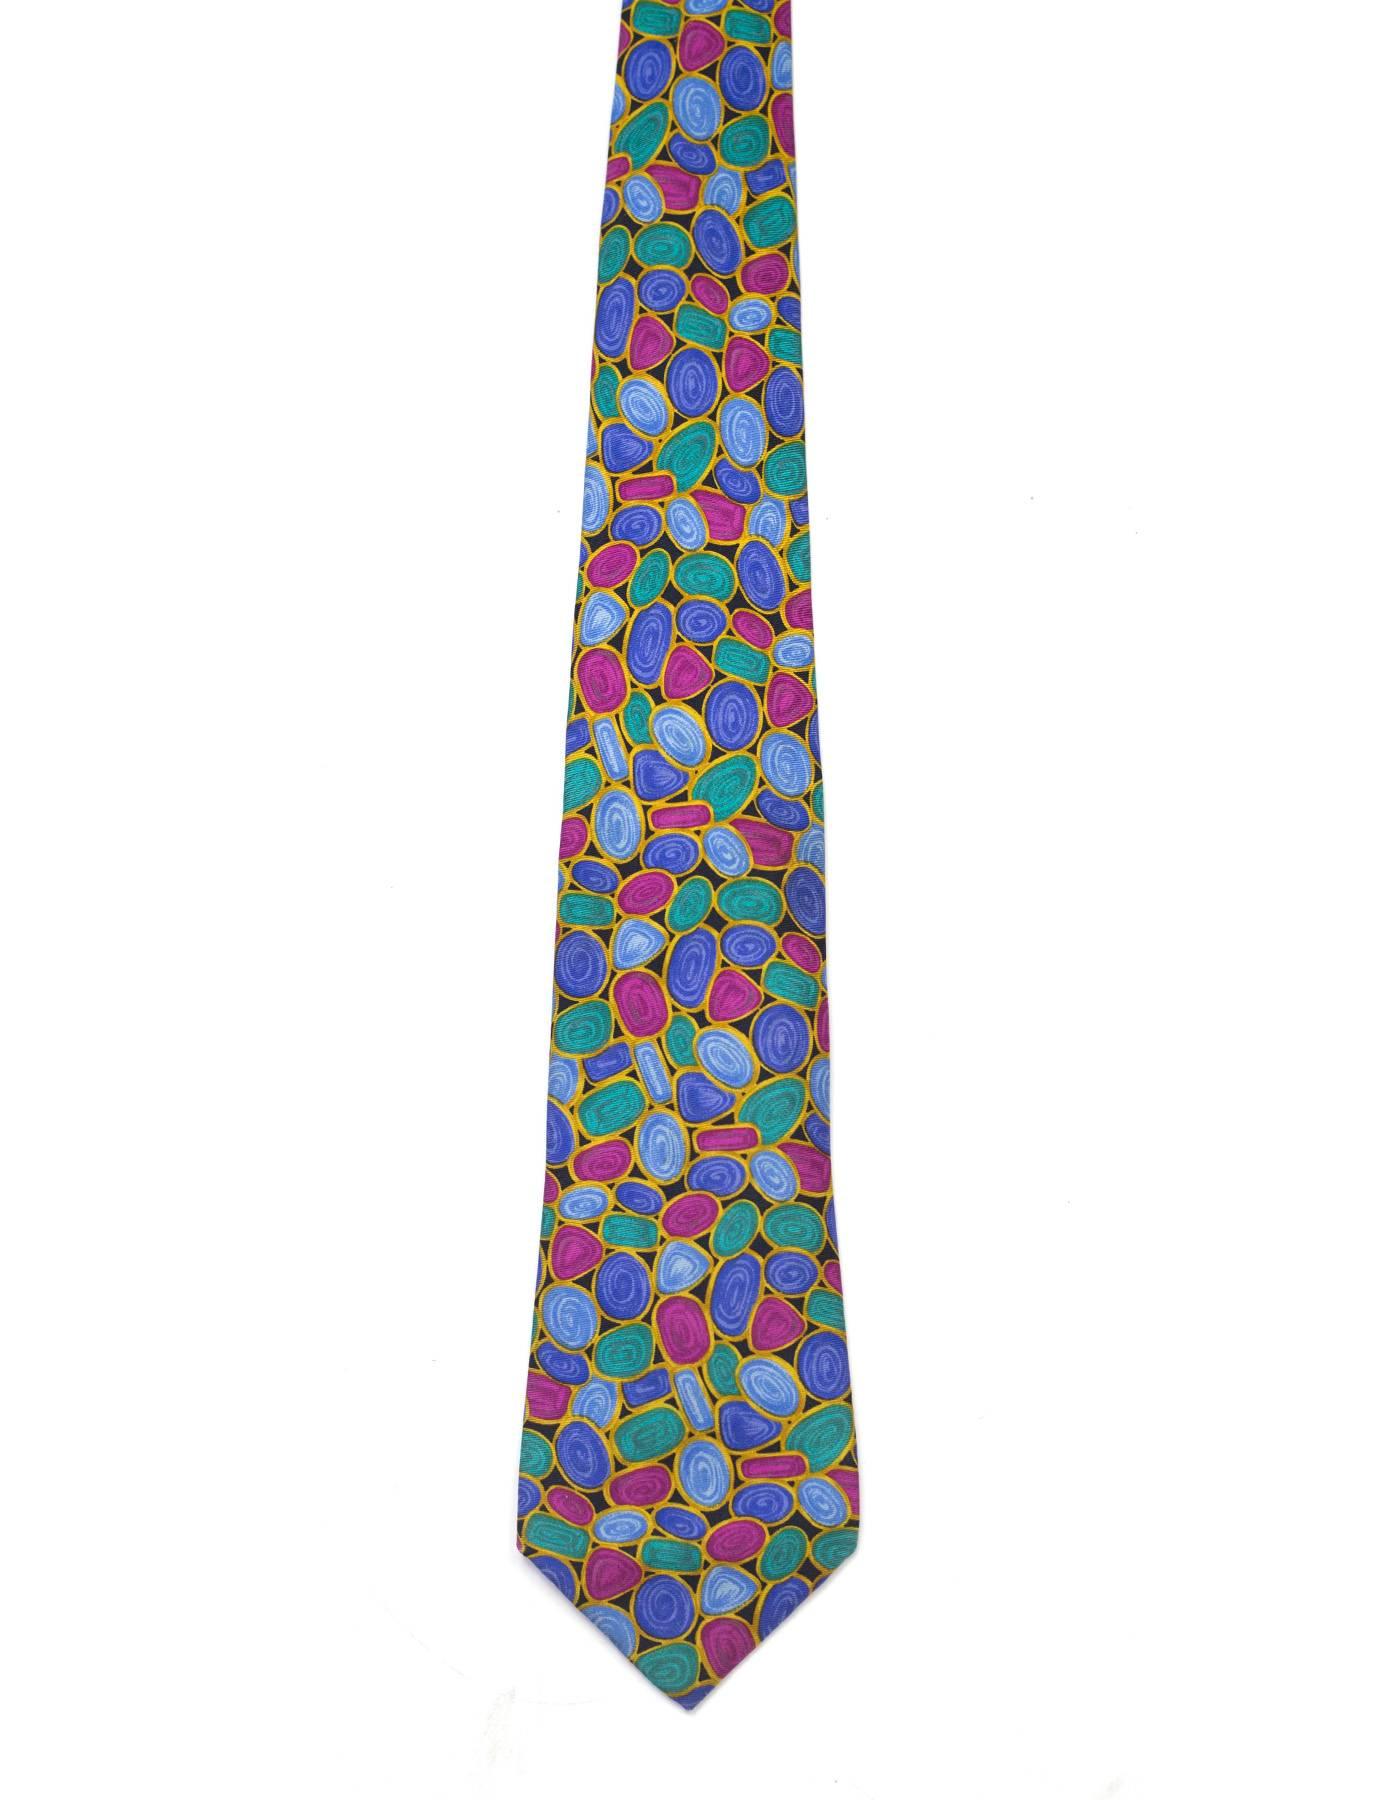 Chanel Multi-Color Jewel Print Silk Tie 

Made In: Italy
Color: Black, blue, gold, green, purple and magenta
Composition: 100% silk
Overall Condition: Excellent pre-owned condition
Measurements: 
Length: 58.5"
Width: 2"-3.5"